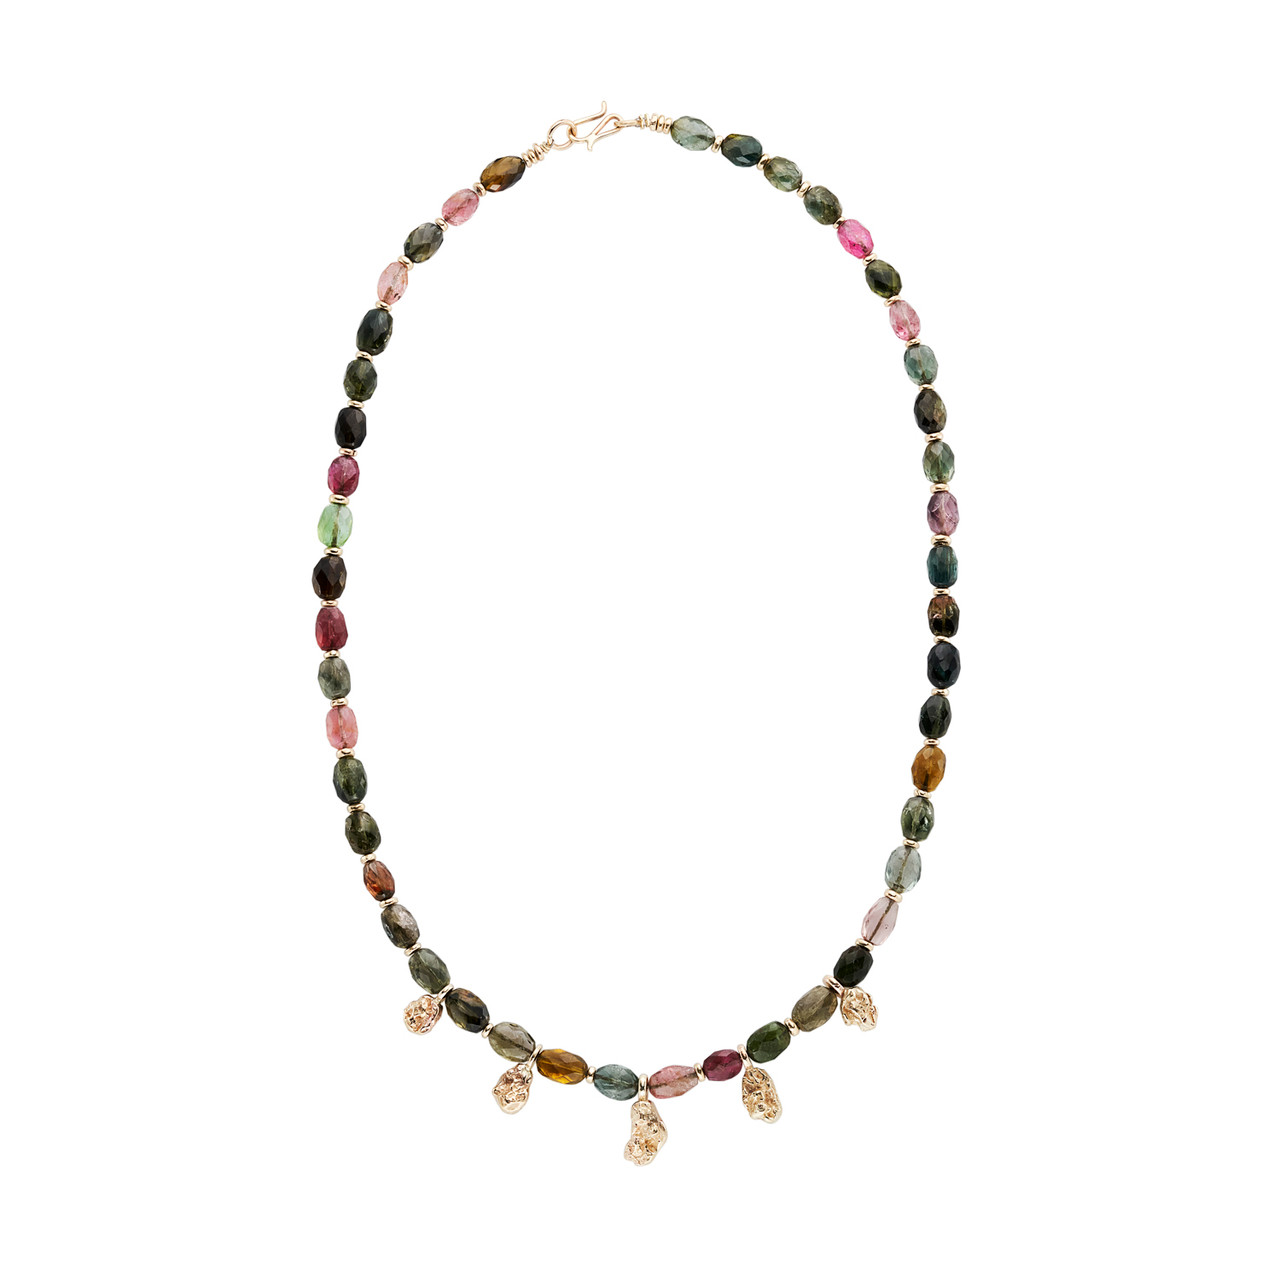 One-Of-A-Kind Tourmaline & Golden Nugget Beaded Necklace, Issy White, tomfoolery